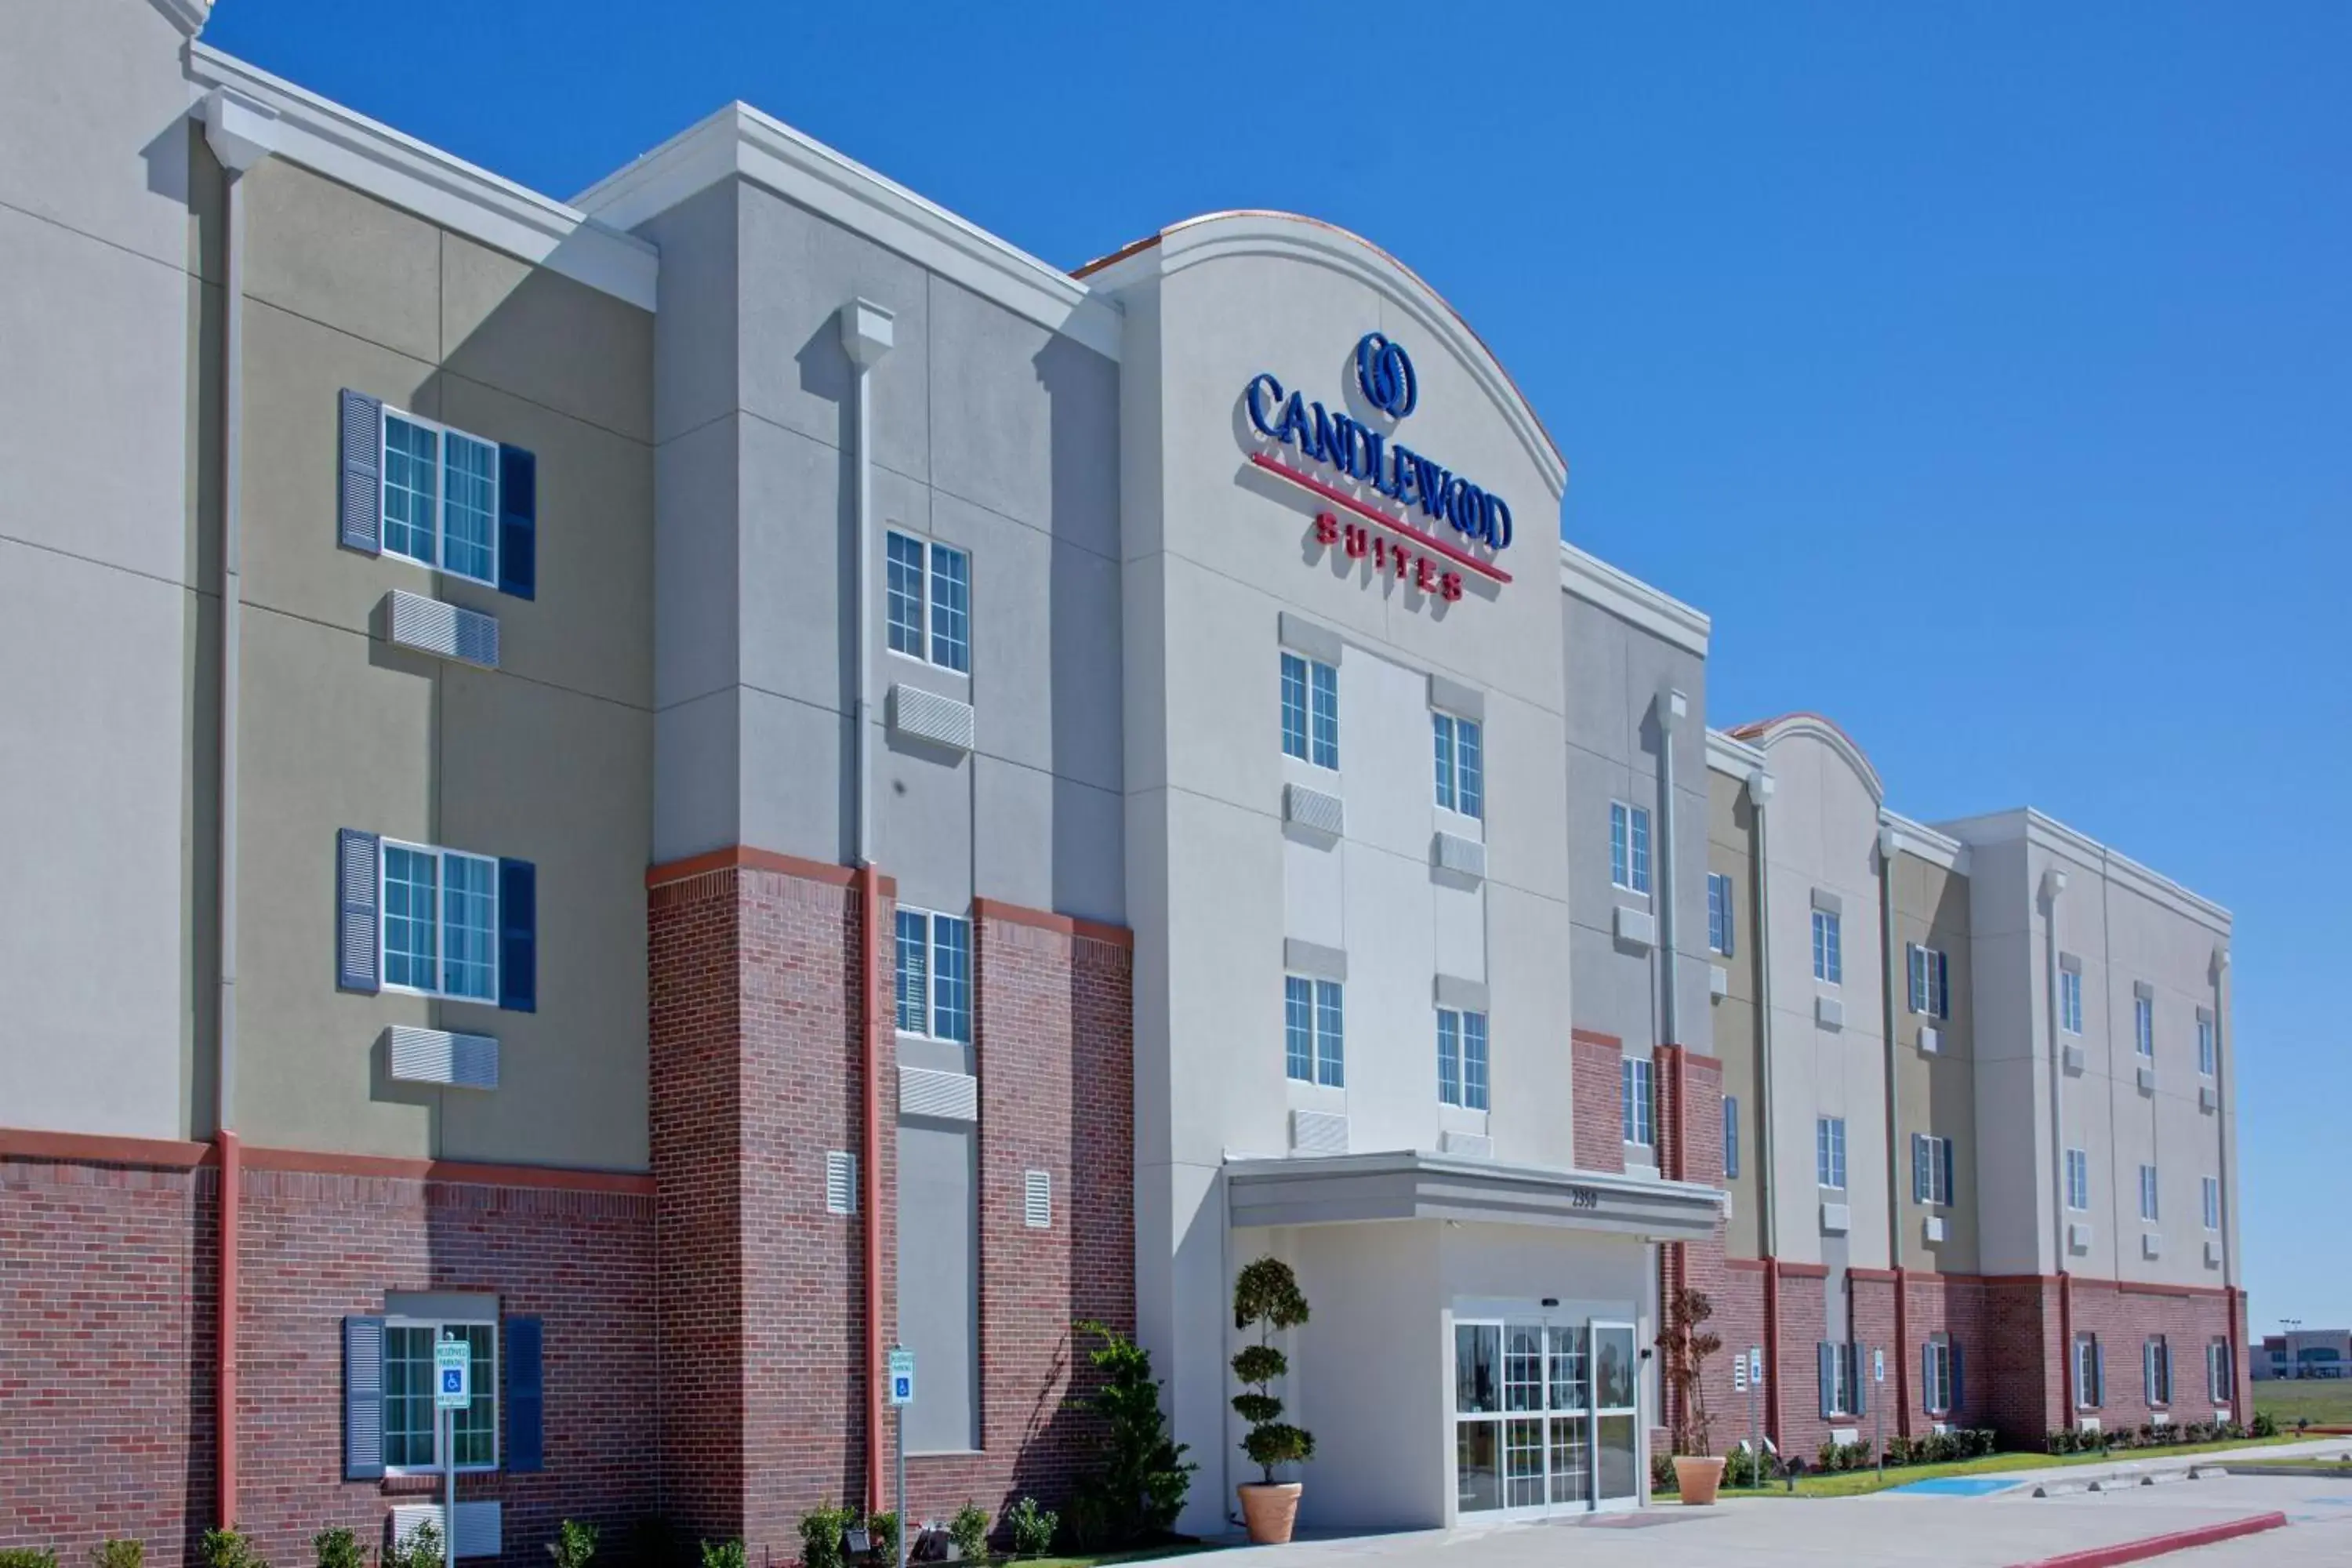 Property Building in Candlewood Suites League City, an IHG Hotel